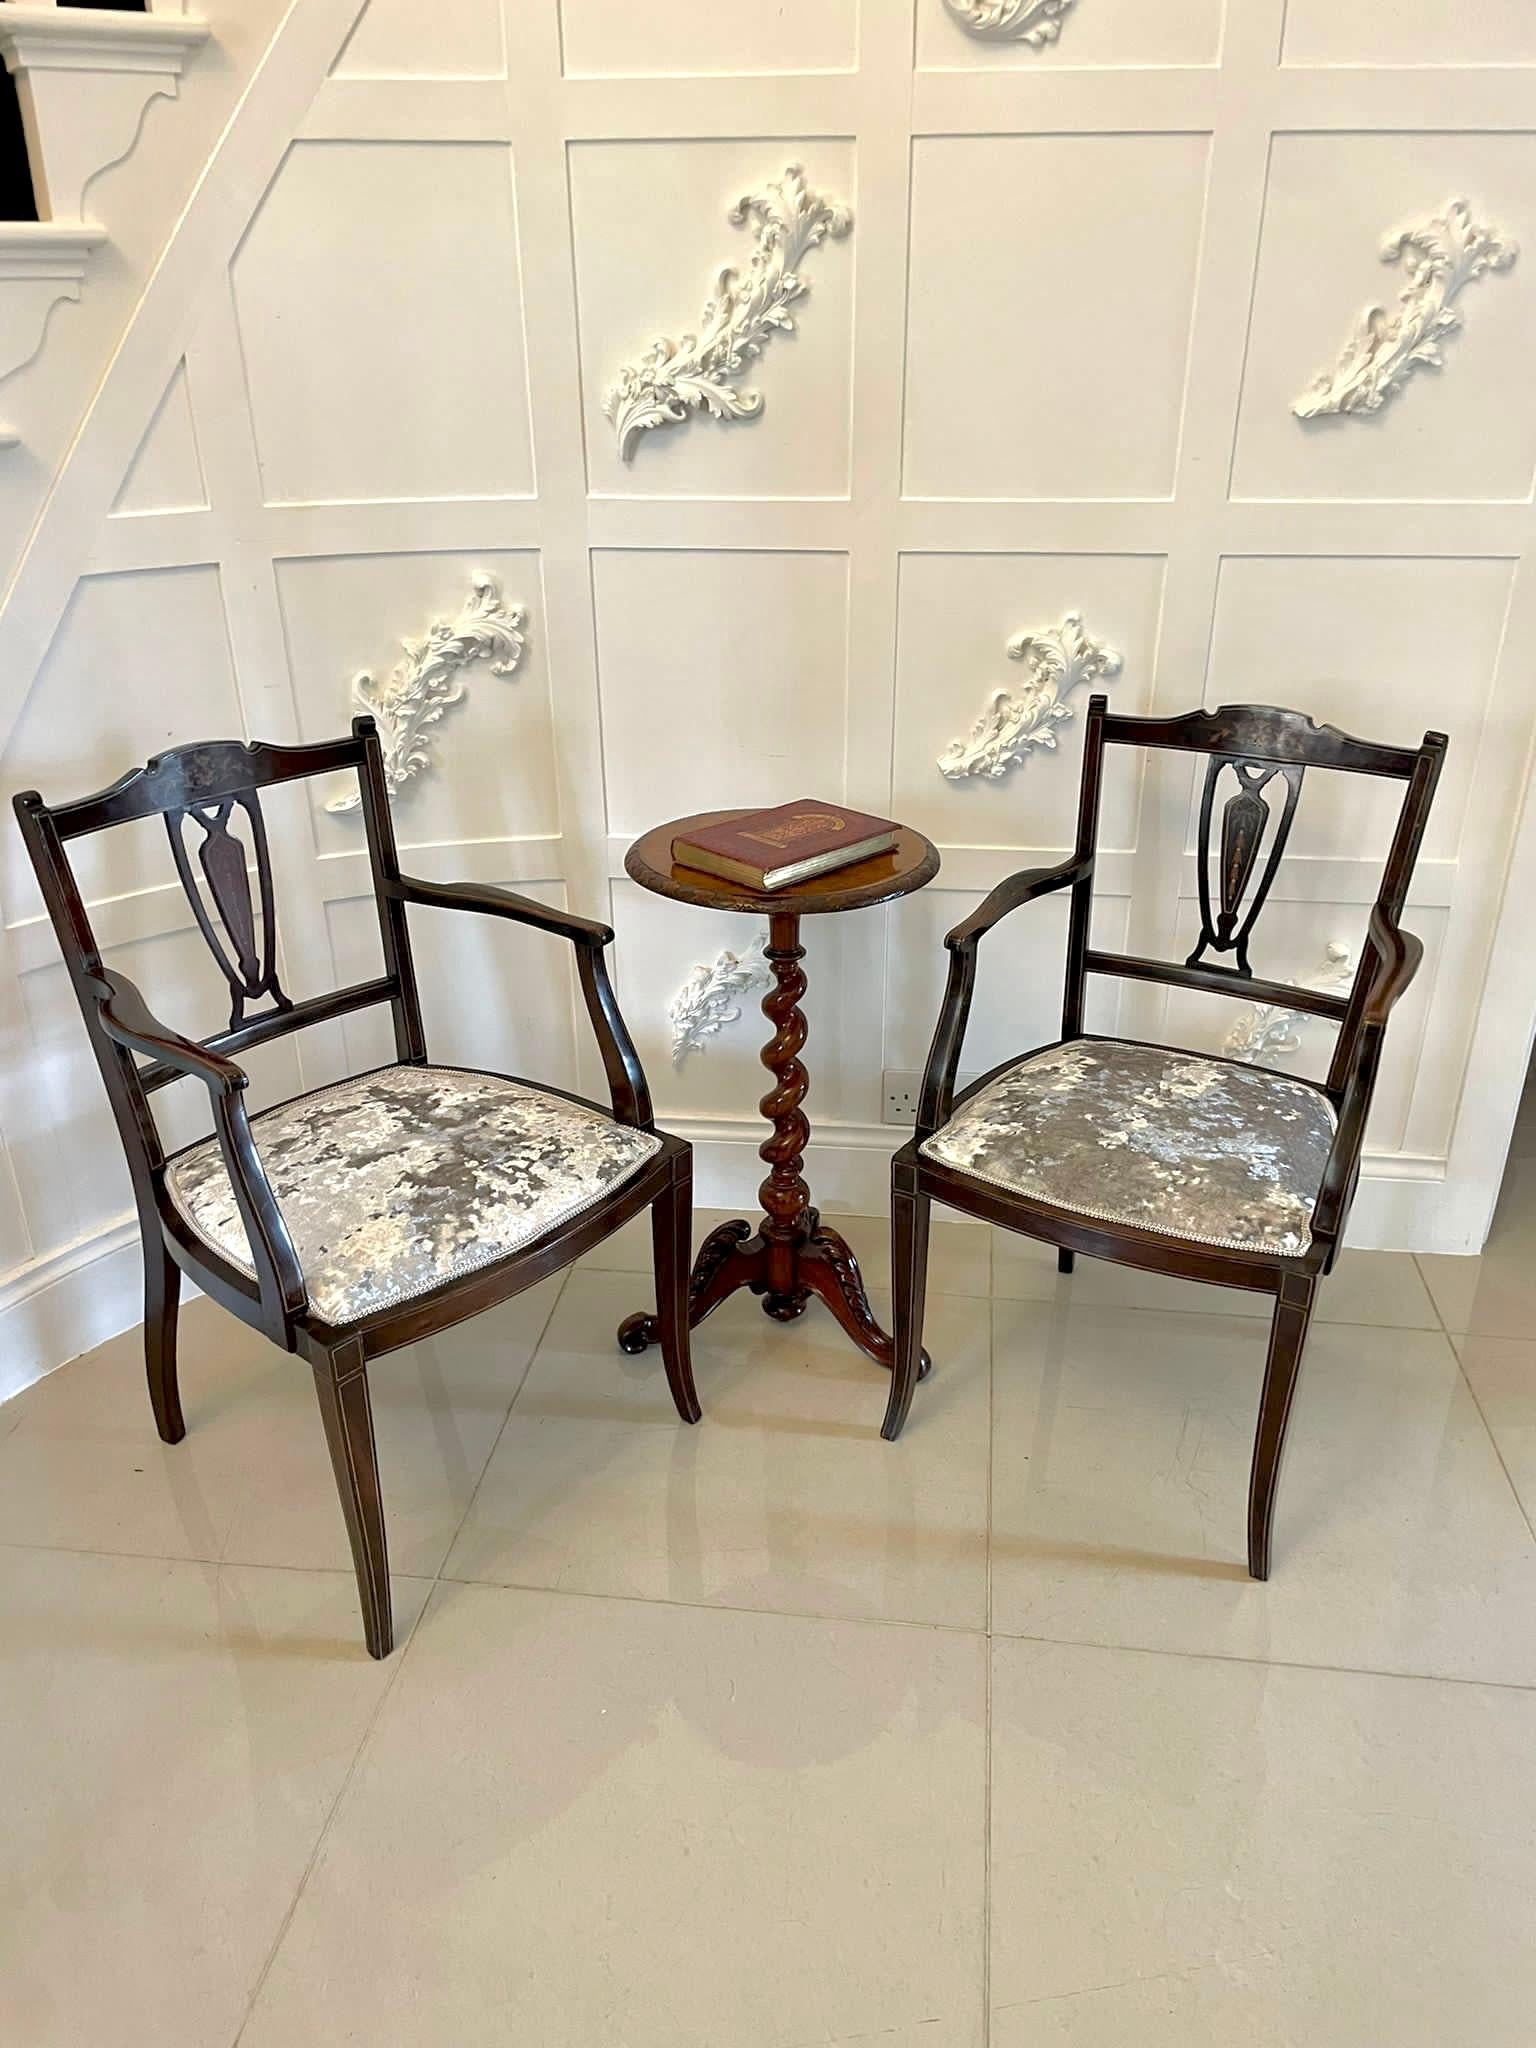 Pair of antique Edwardian mahogany inlaid armchairs with an elegant inlaid shaped top rail and centre splat. Newly recovered seats in a quality stylish fabric. They are supported by attractive shaped inlaid front legs and out swept back legs

An